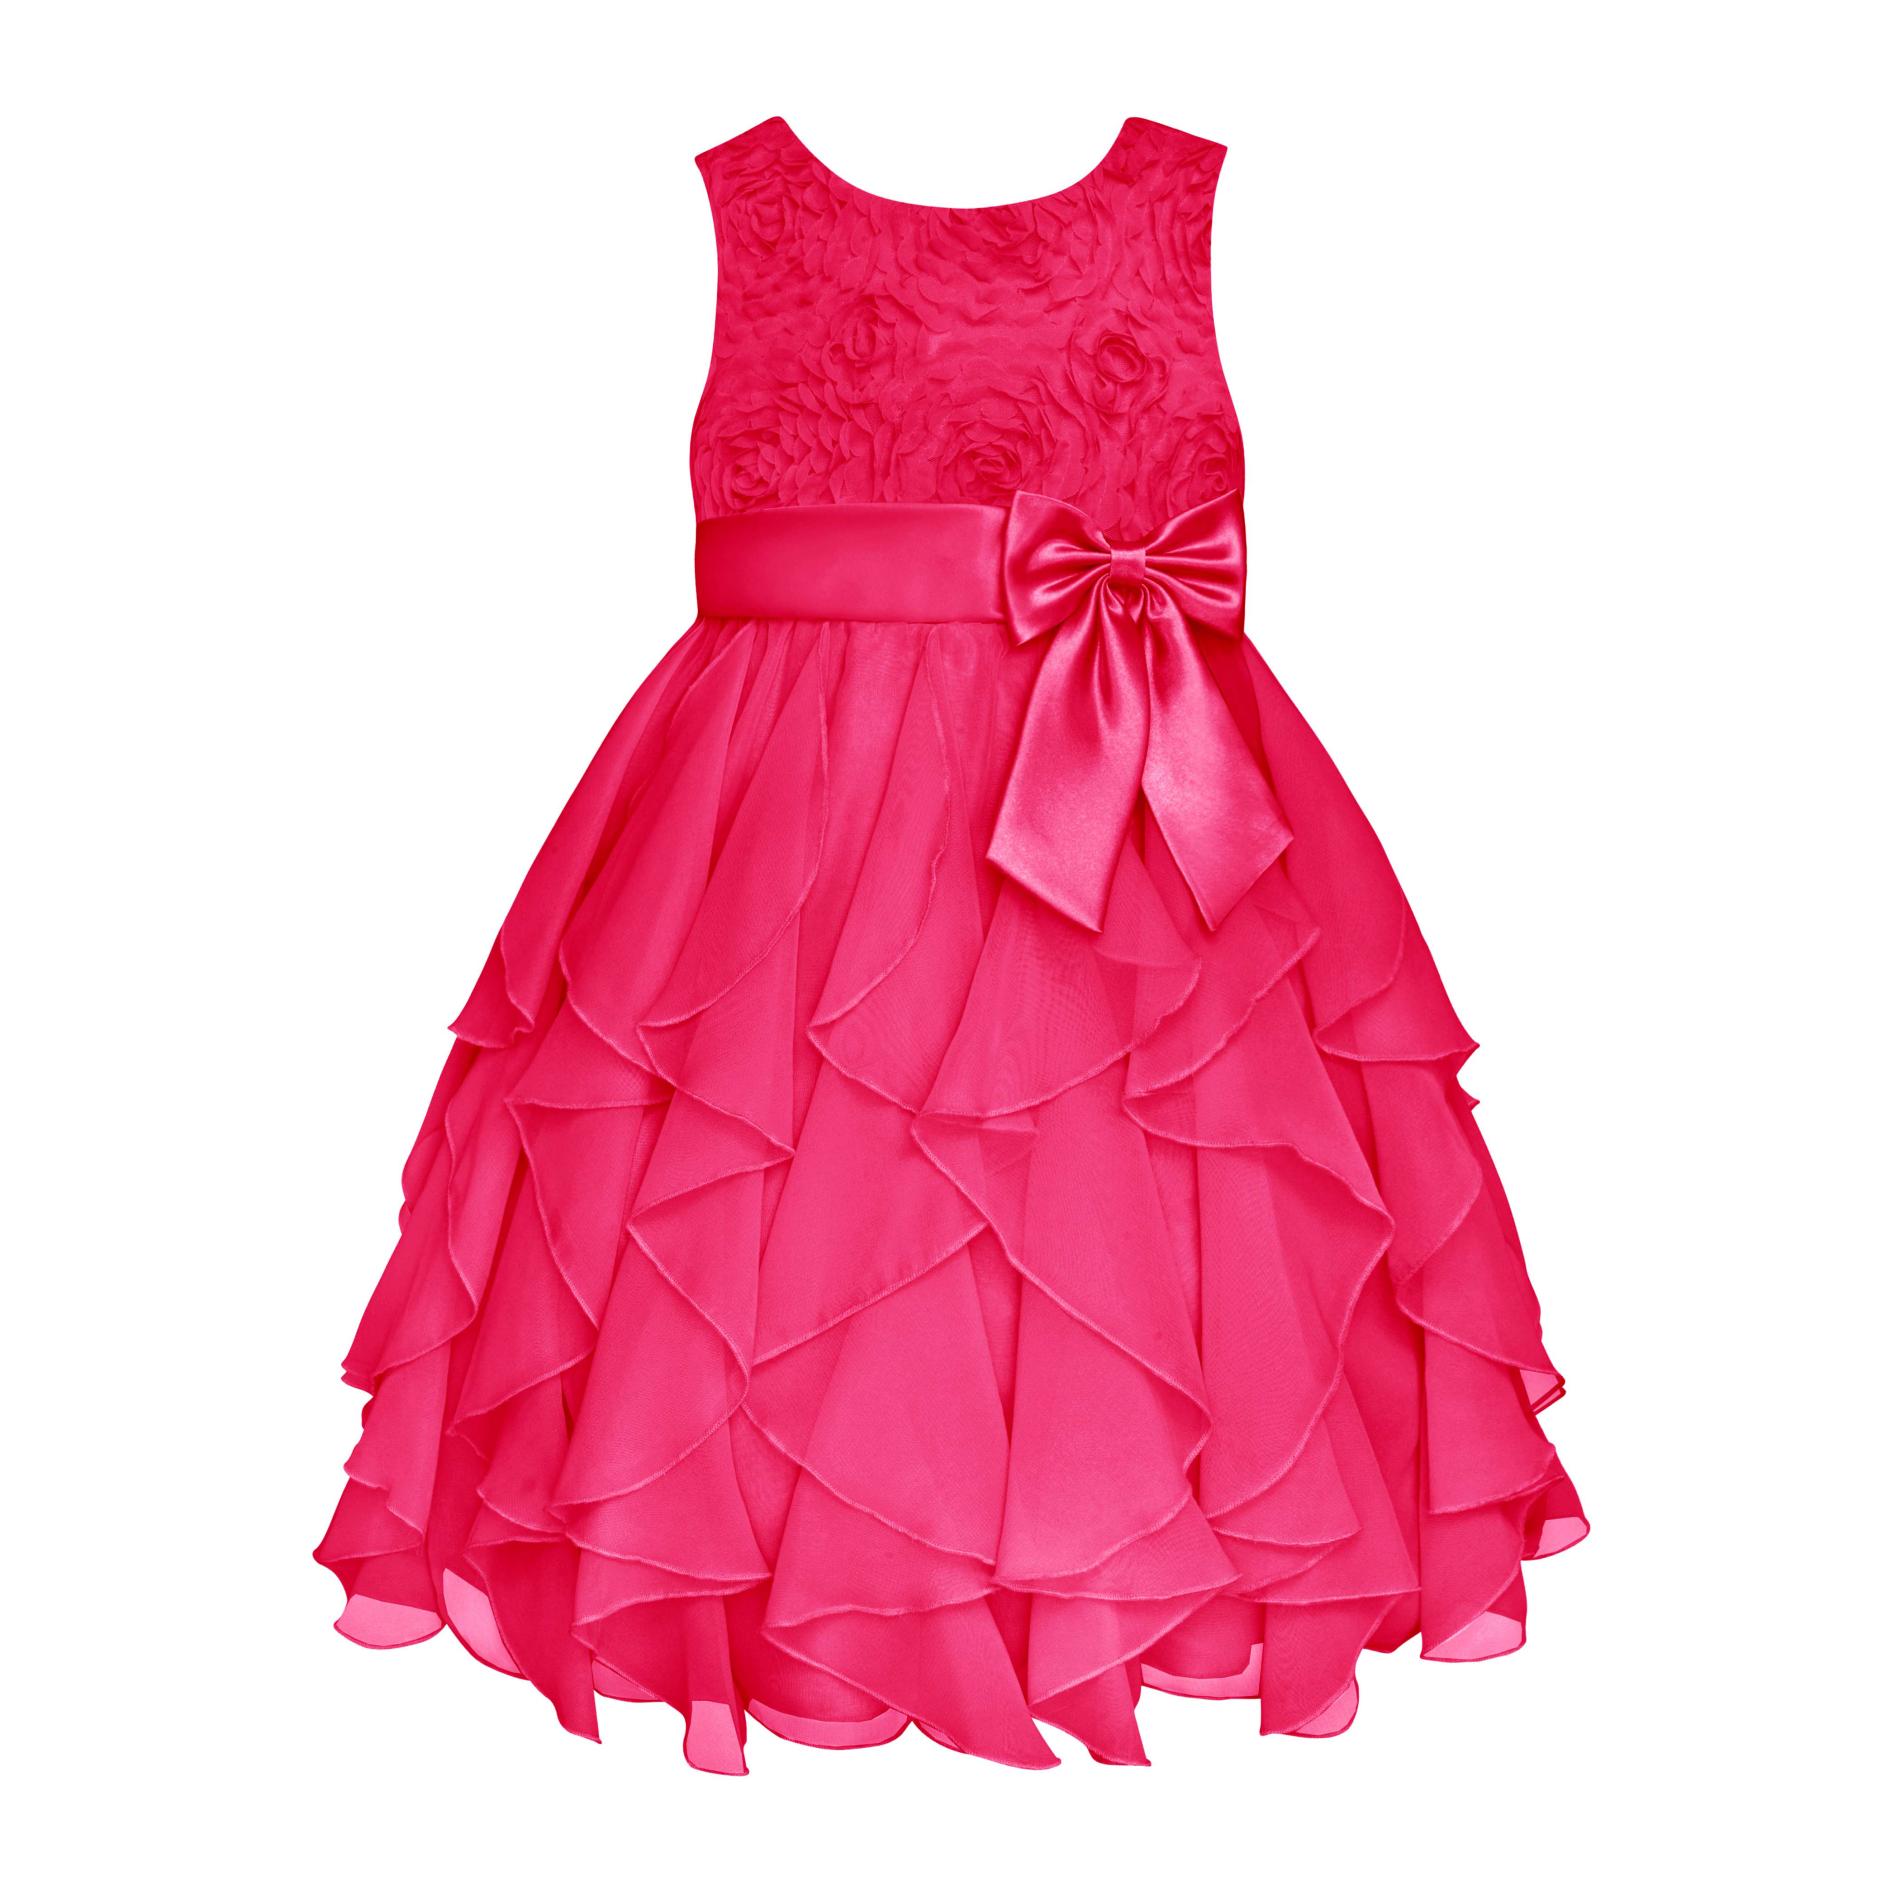 American Princess Infant & Toddler Girl's Ruffled Party Dress